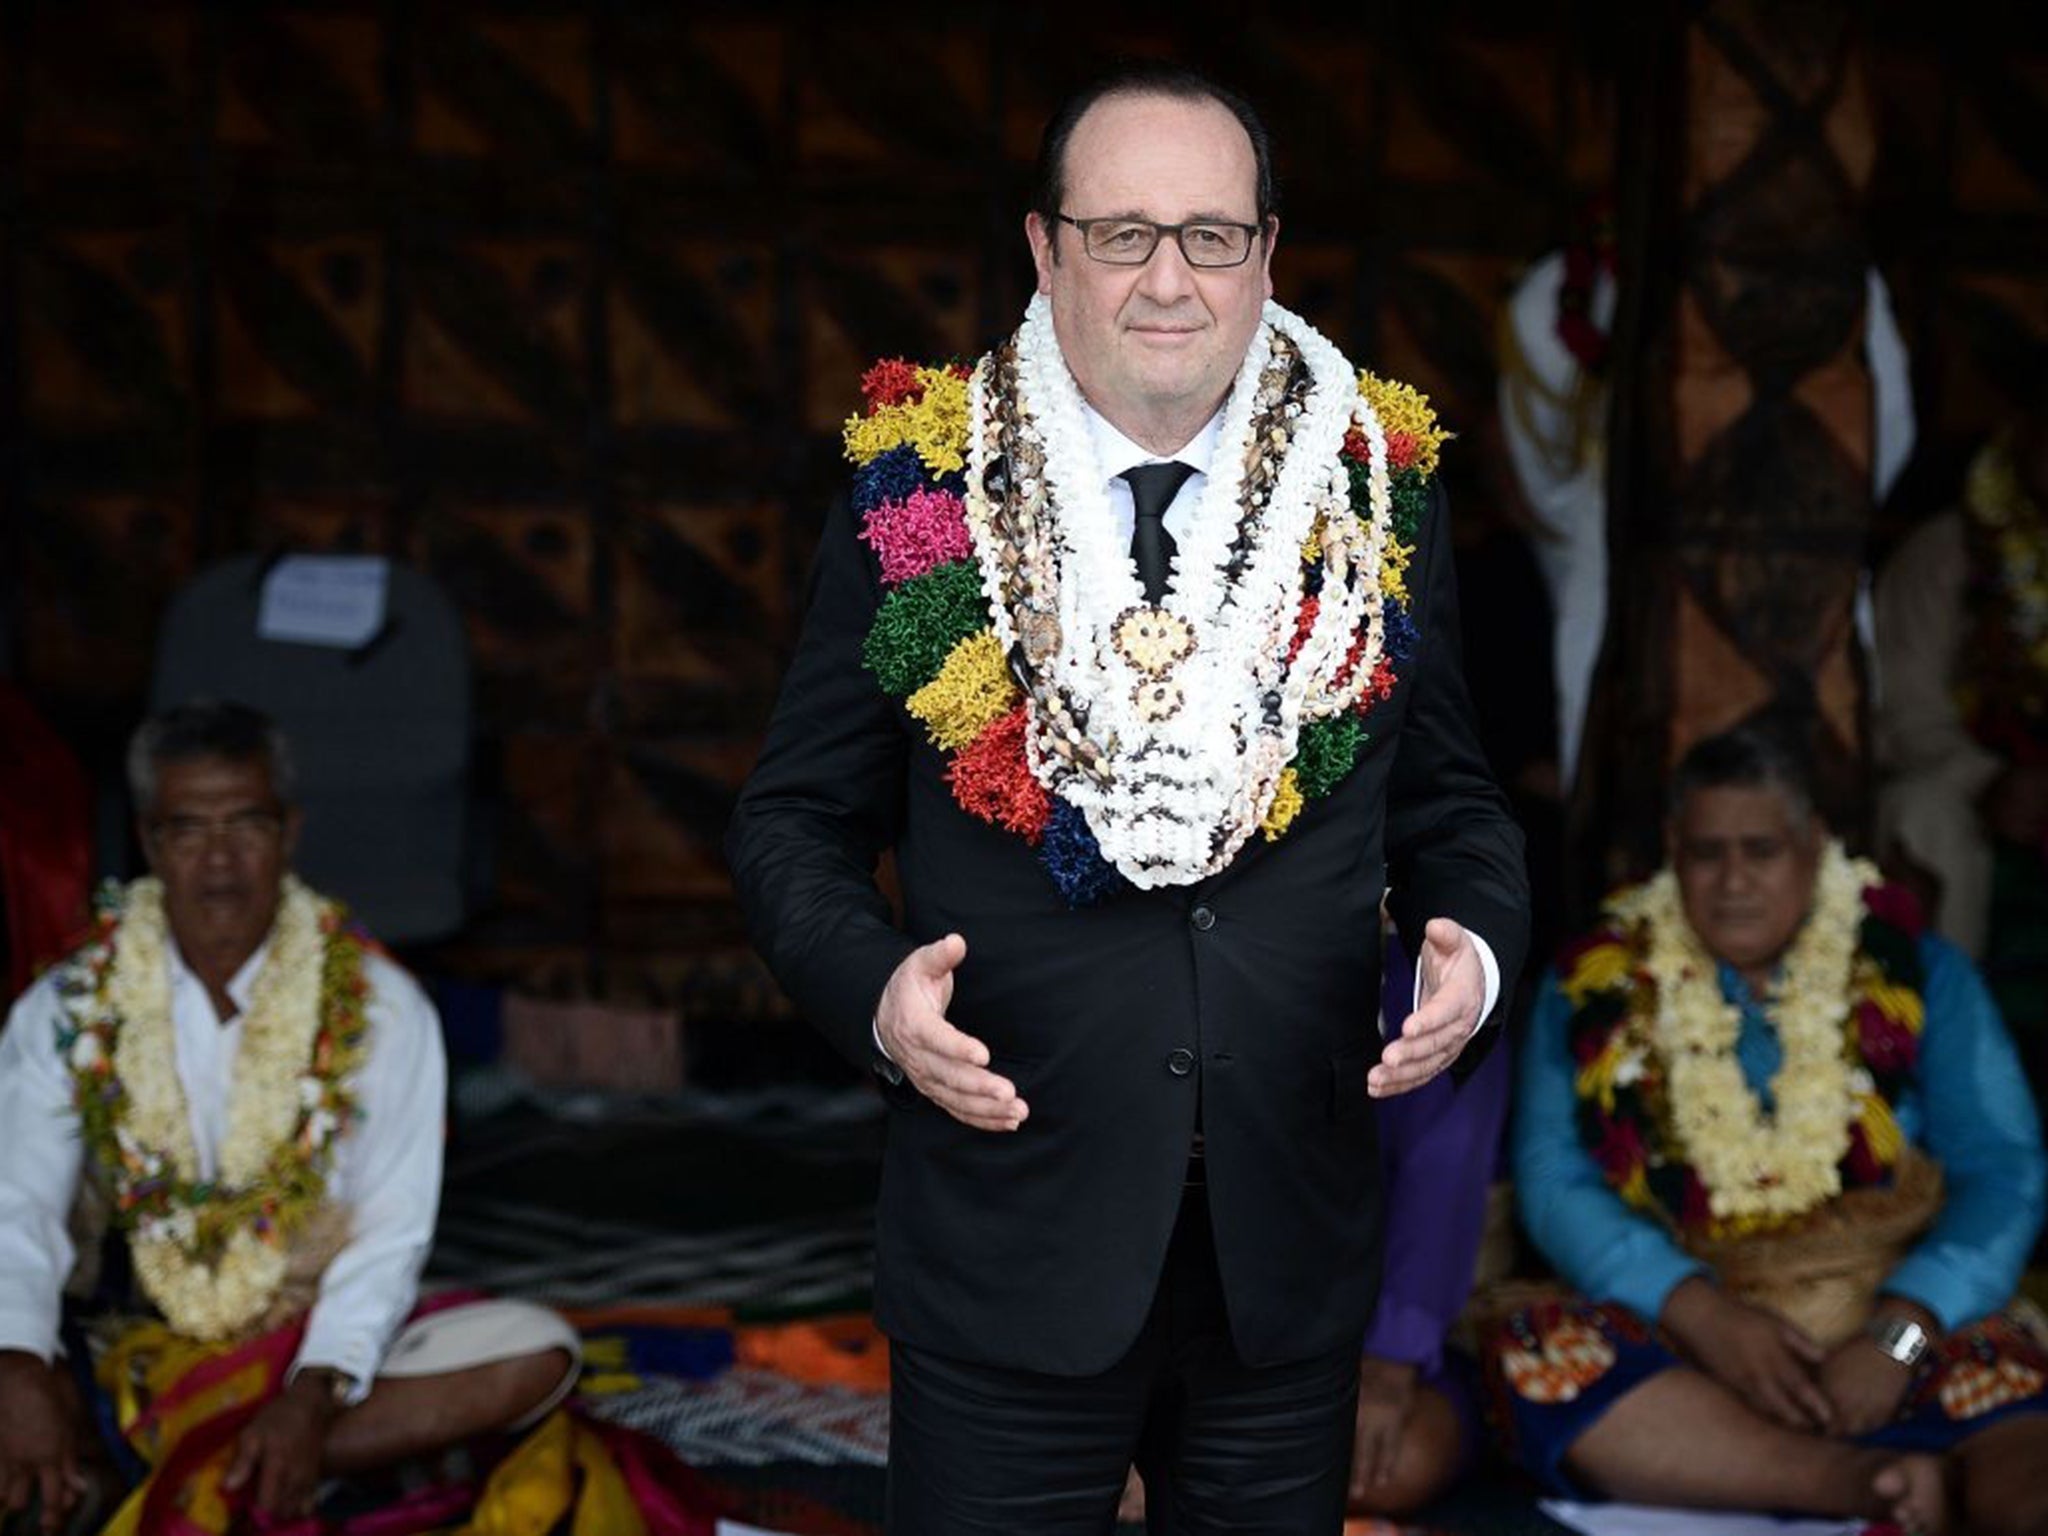 French President Francois Hollande delivers a speech during a ceremony by "la grande chefferie du royaume d'Uvea" (Uvea's Kingdom high chiefdom) in Wallis island in the French overseas territory of the Wallis and Futuna Islands during a two-days visit.